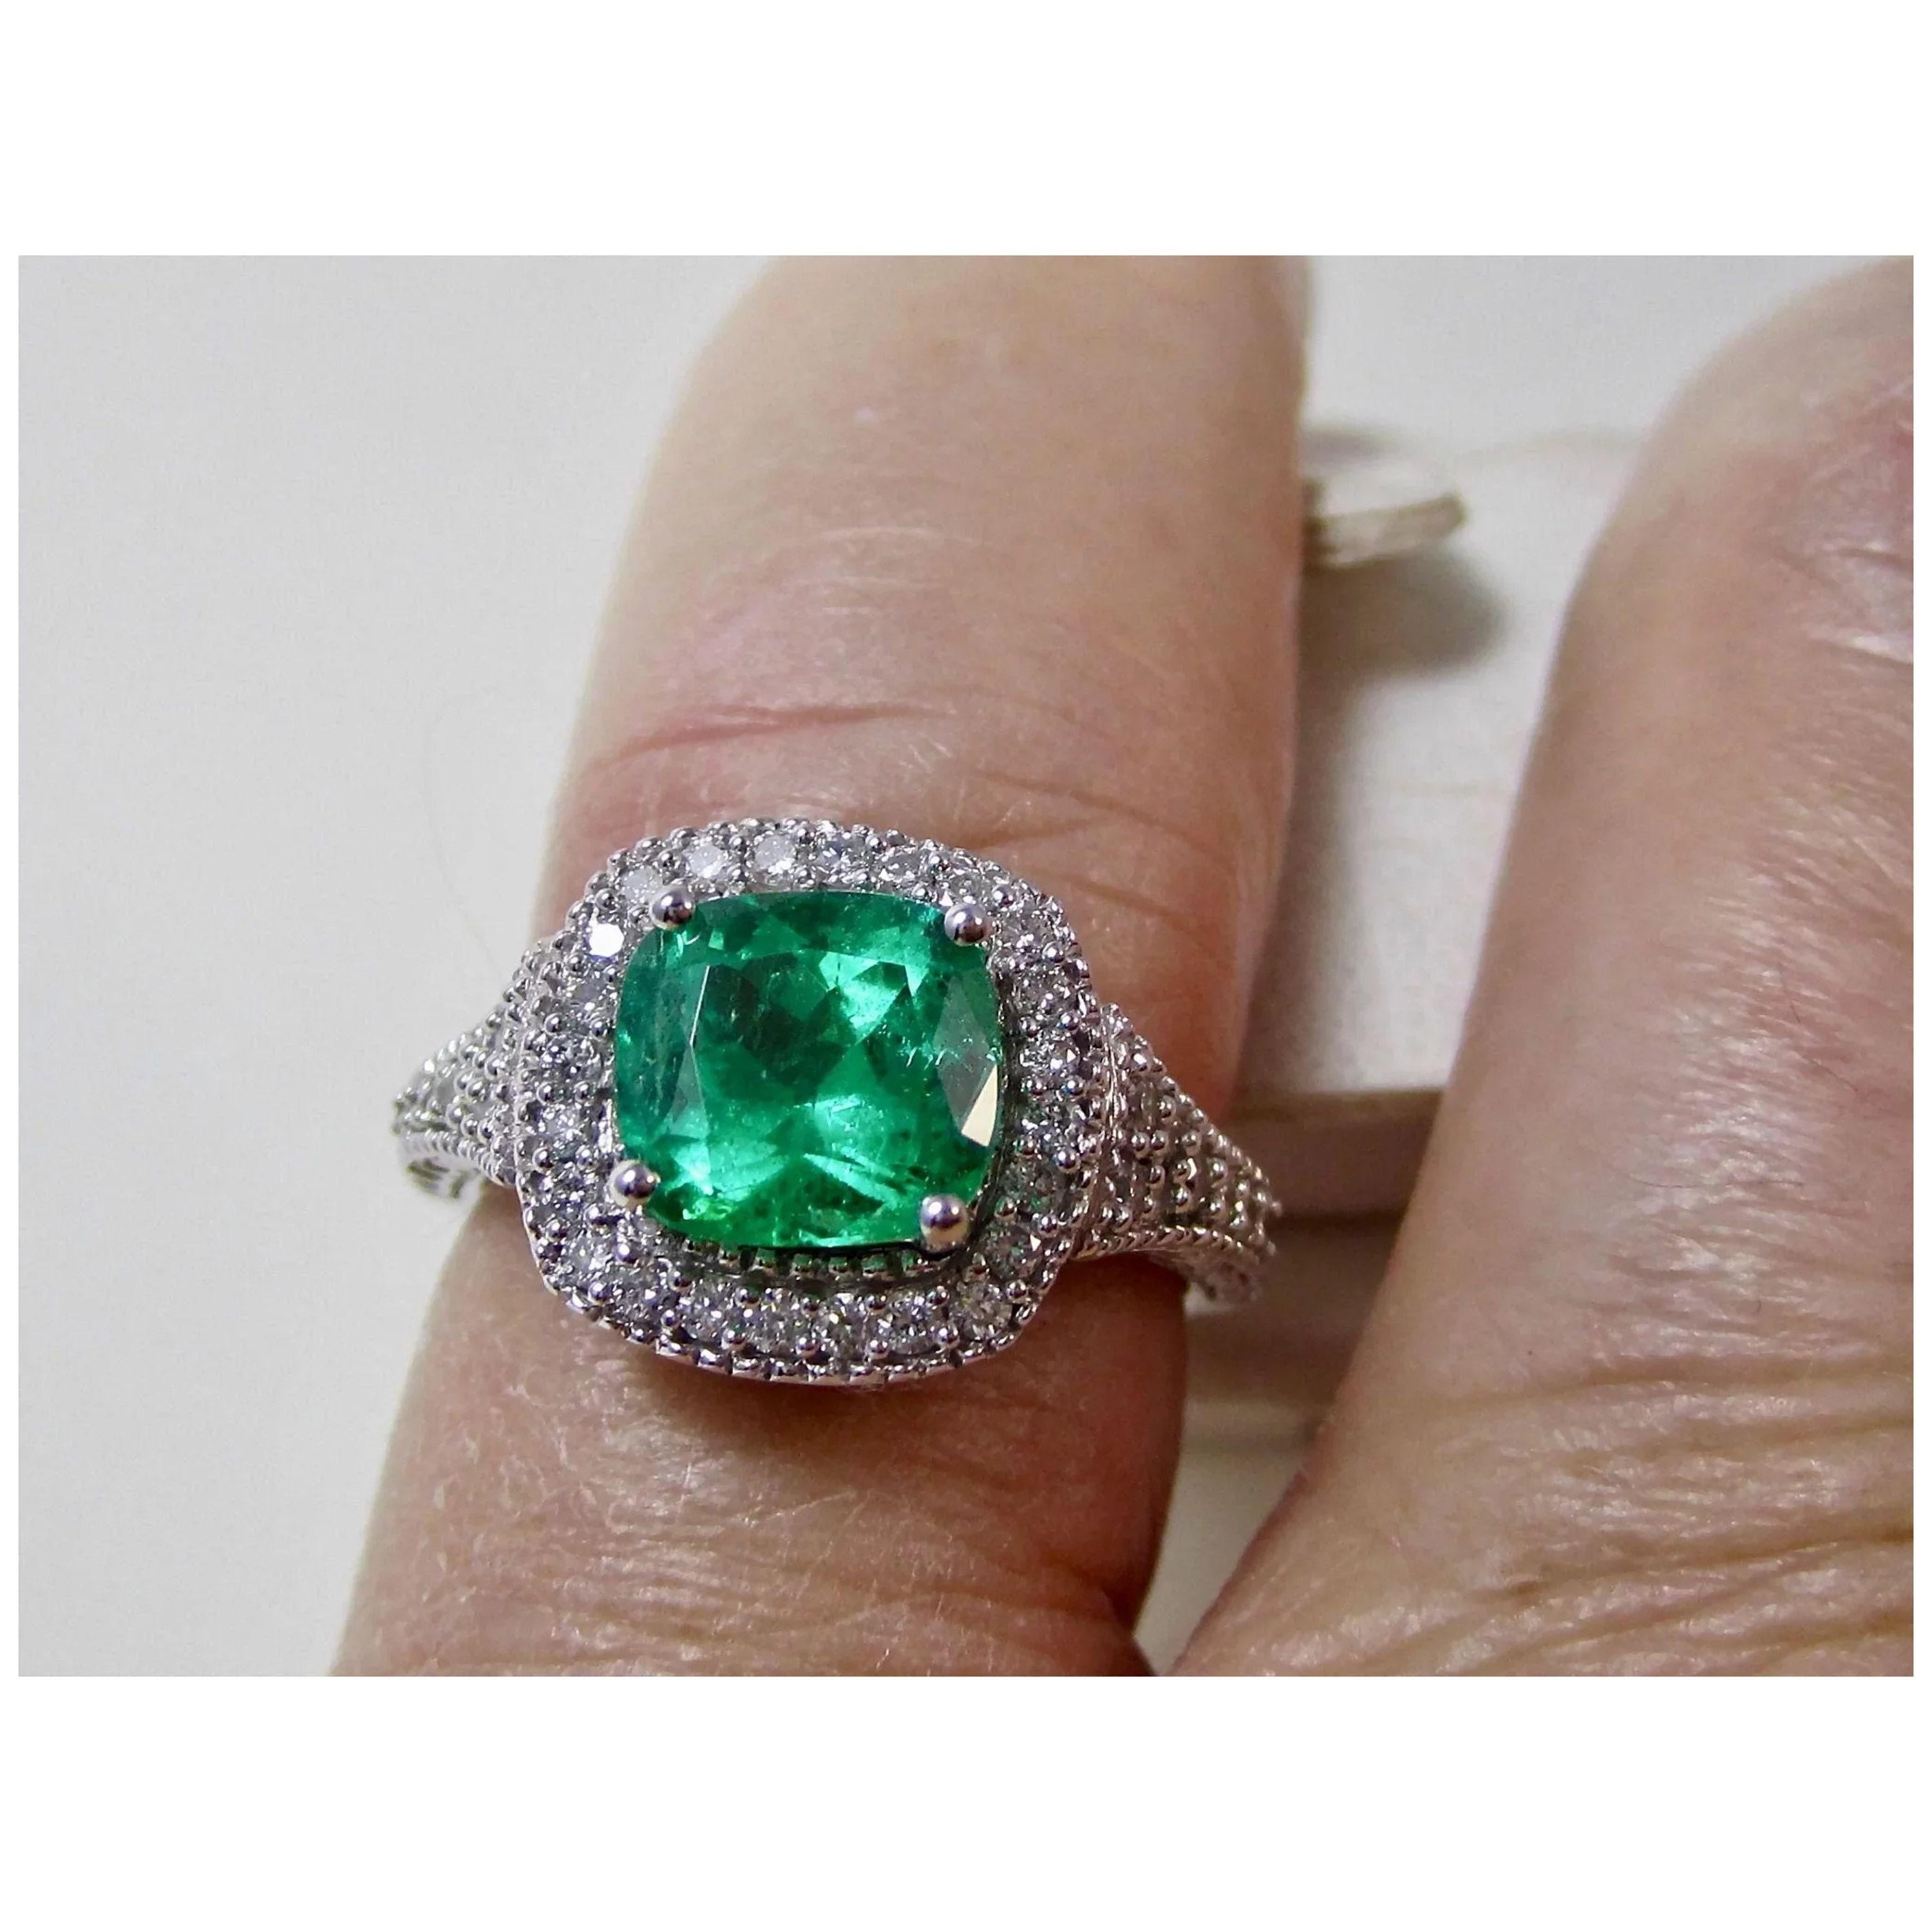 For Sale:  Vintage 3 CT Certified Natural Emerald Diamond Engagement Band Ring in 18K Gold 5